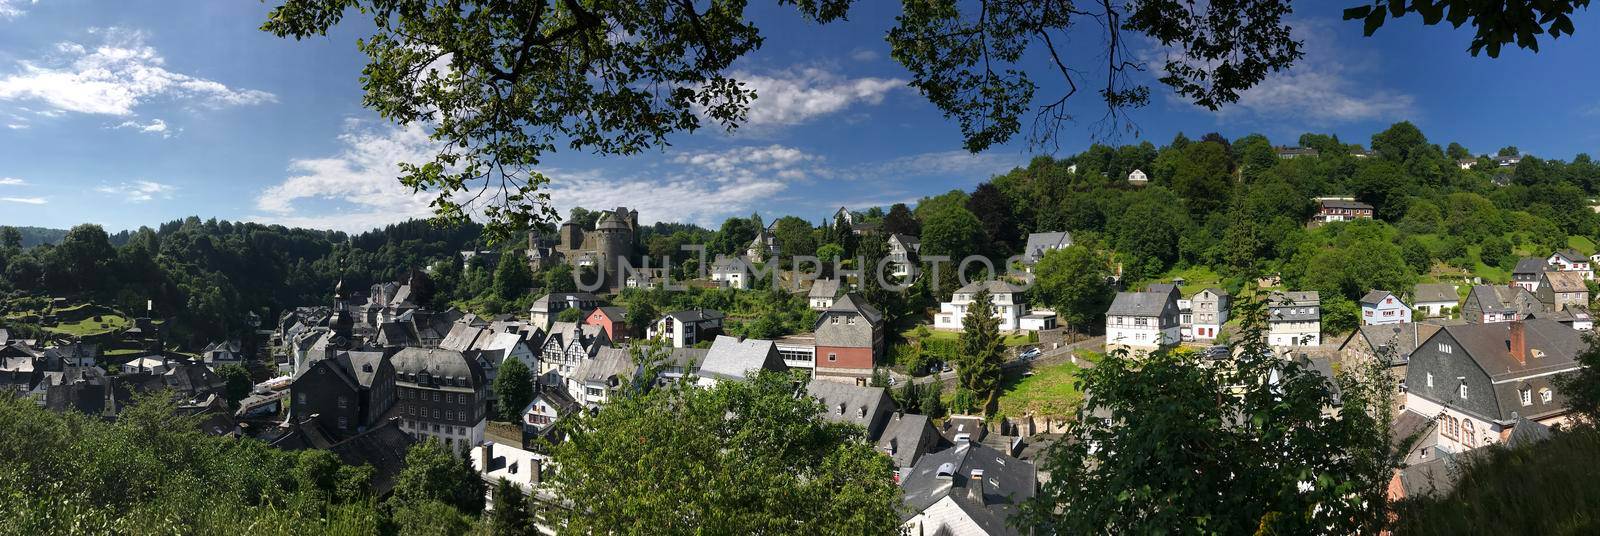 Panorama from Monschau in Germany 